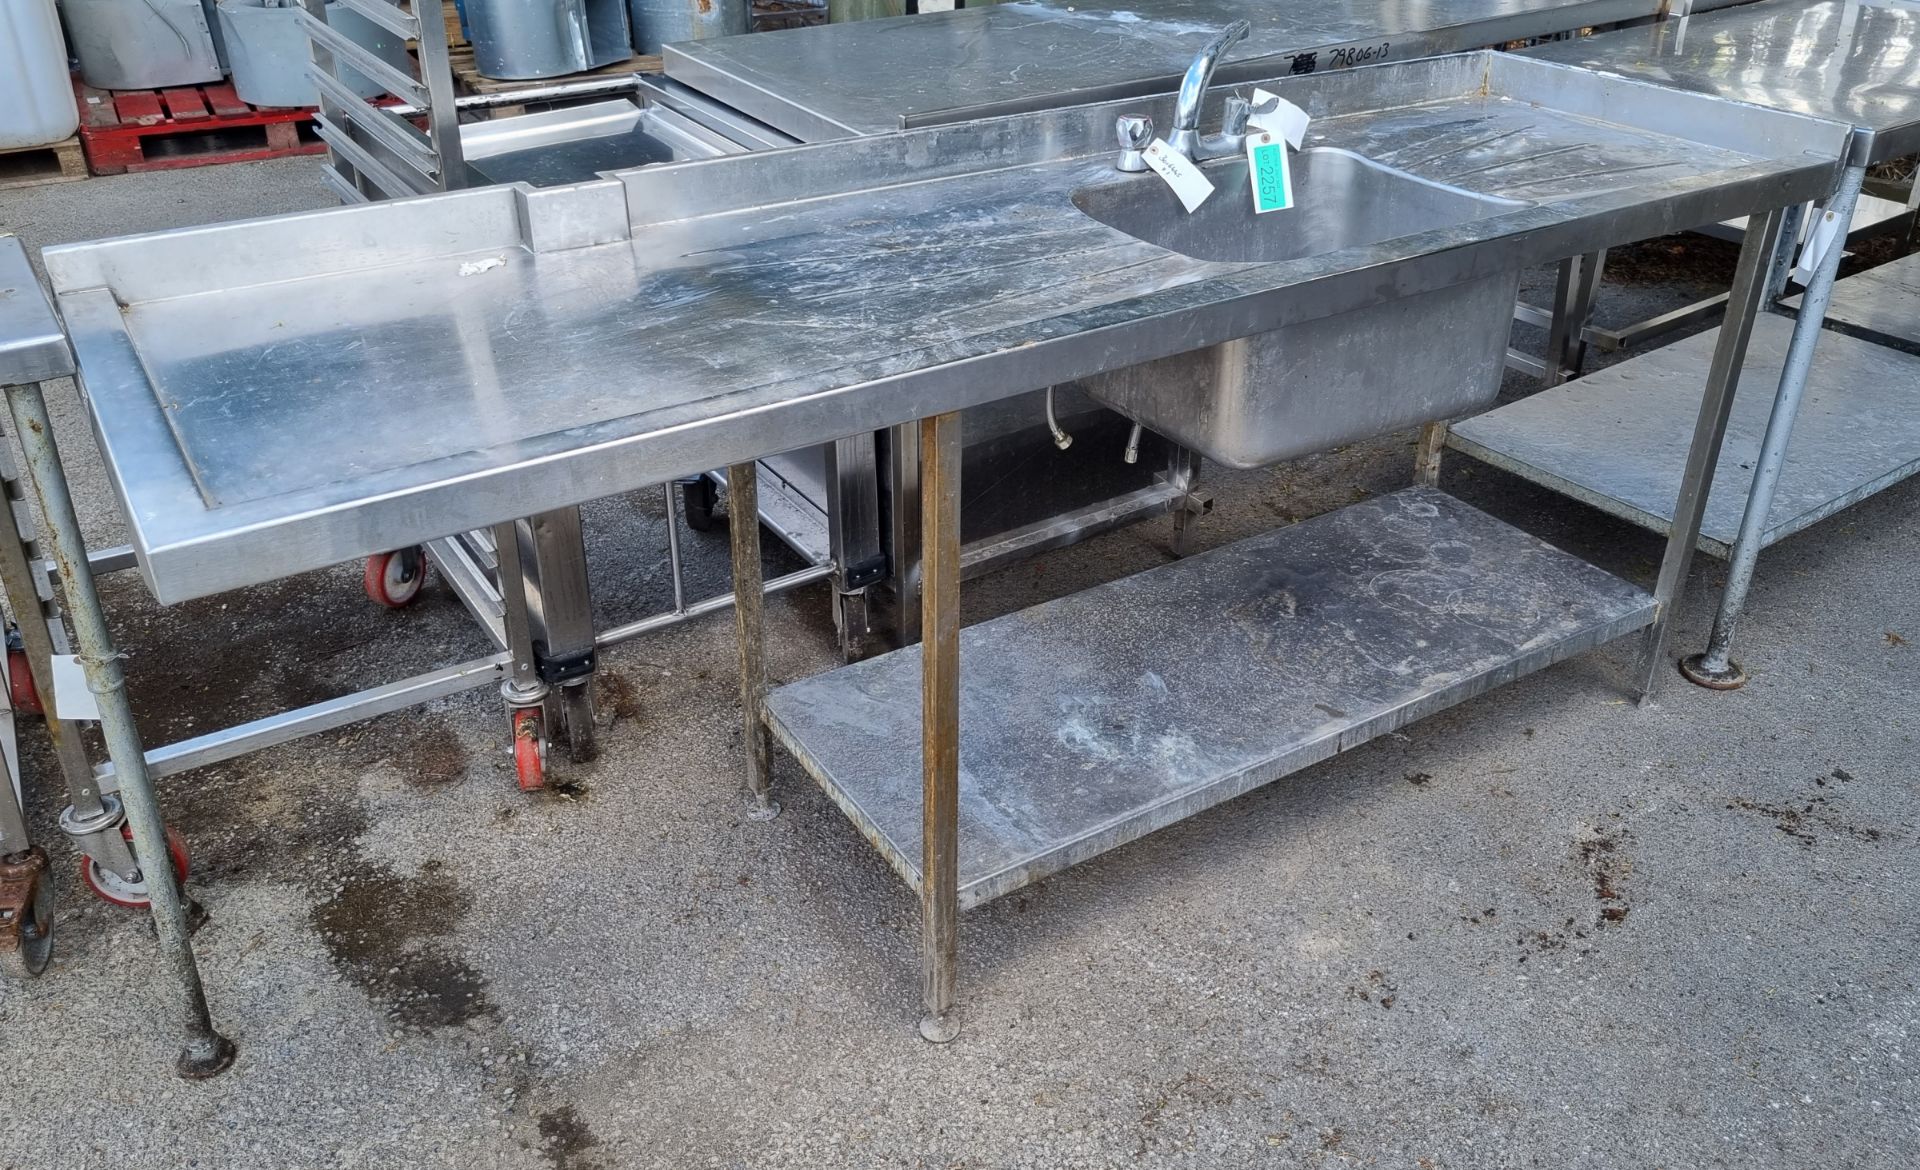 Stainless Steel single sink with left hand drainer - L215 x W64 x H100cm - Image 2 of 4